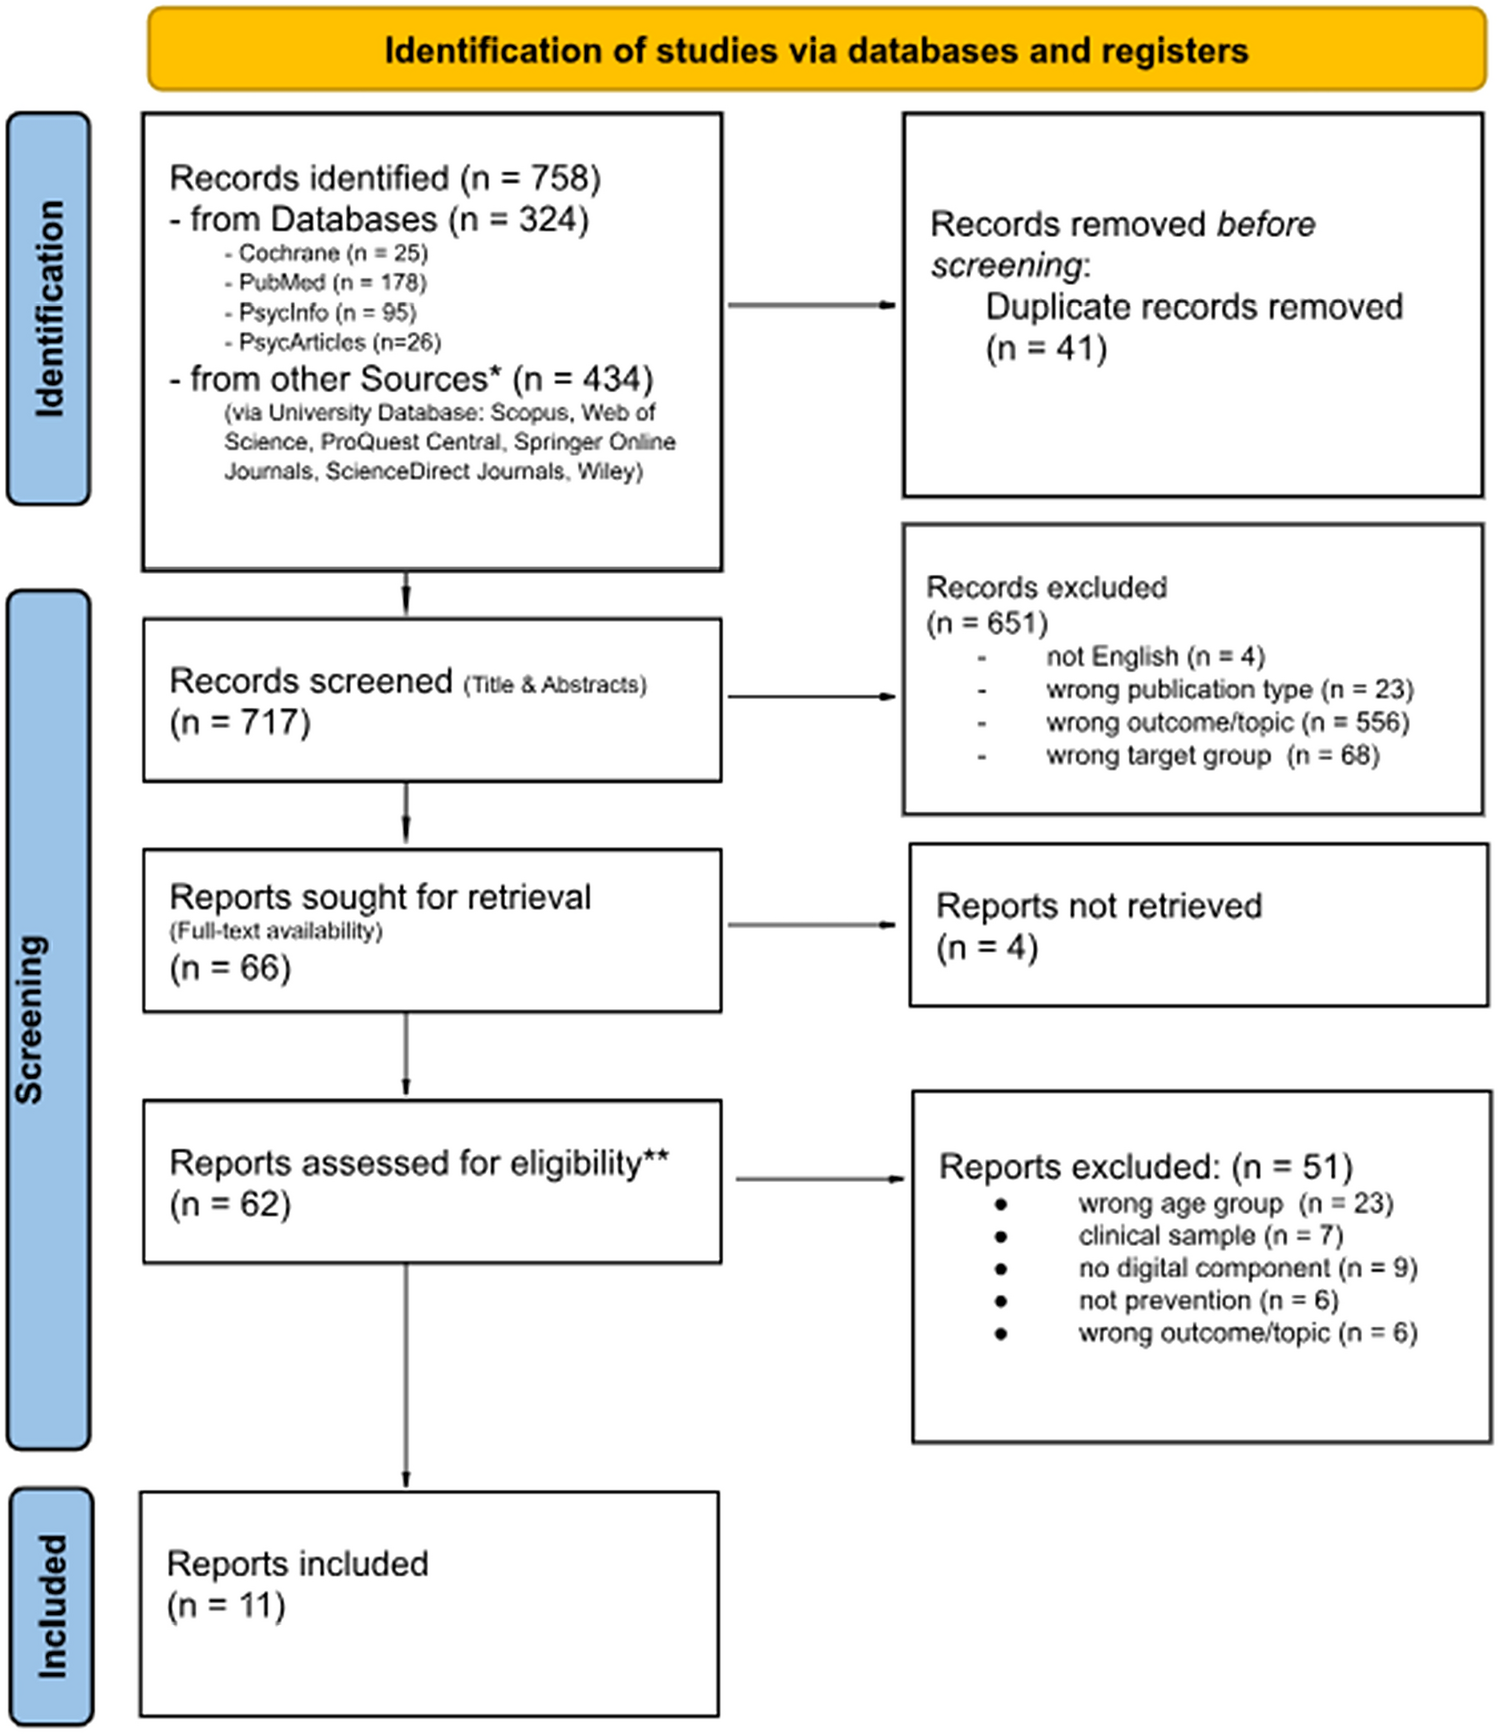 Key Components and Content of Effective Evidence-Based Digital Prevention Programs for Anxiety and Depression in Children and Adolescents: A Systematic Umbrella Review